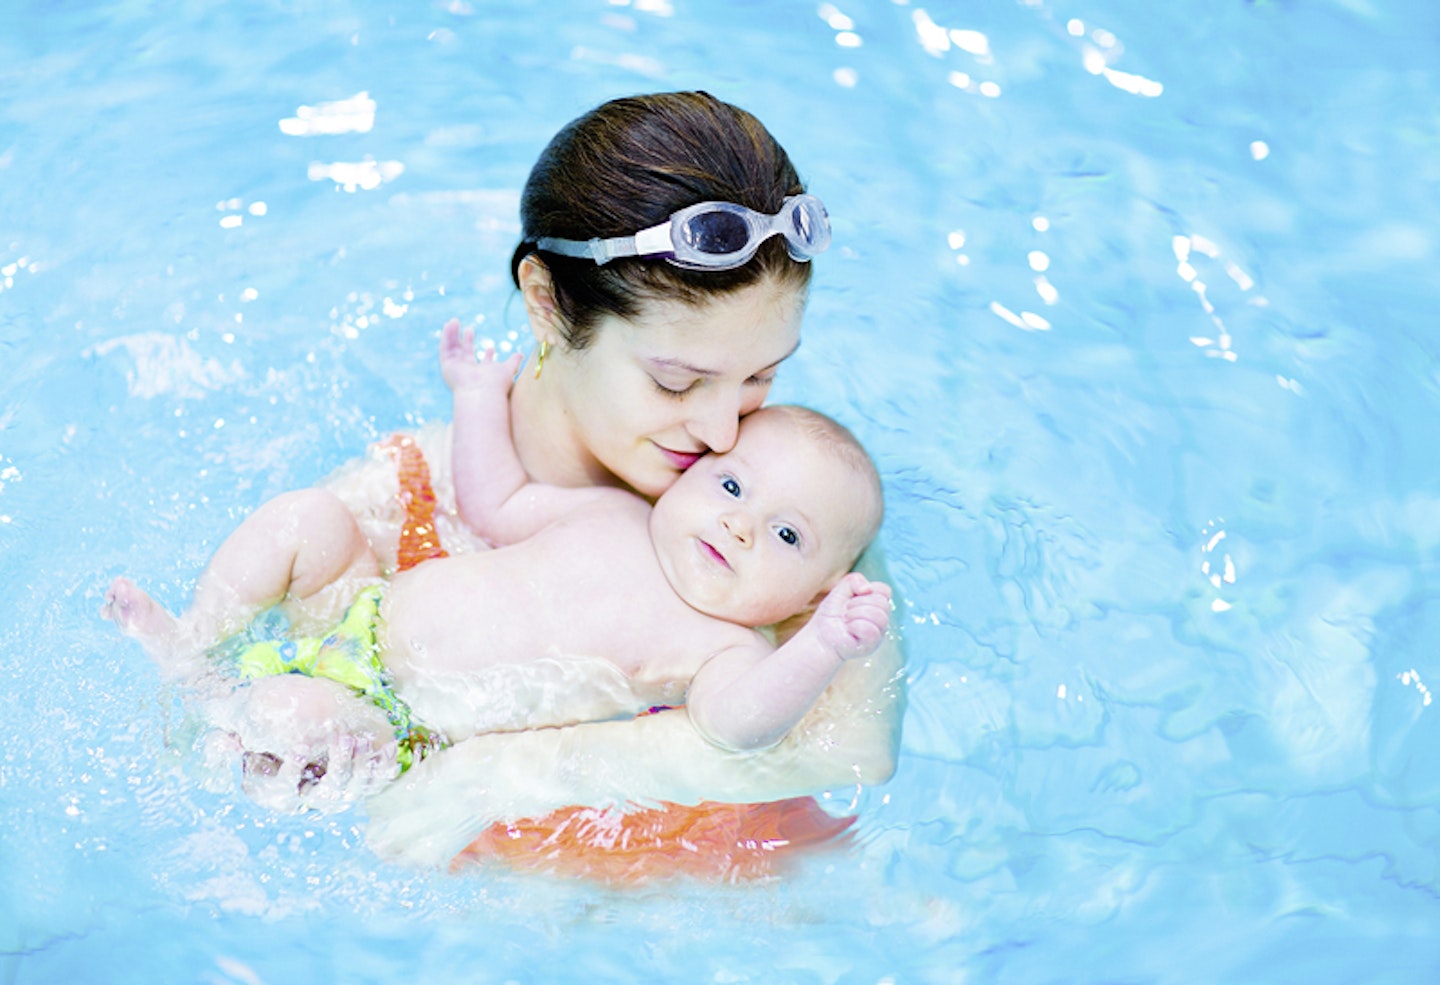 Baby swimming - at what age can you start?